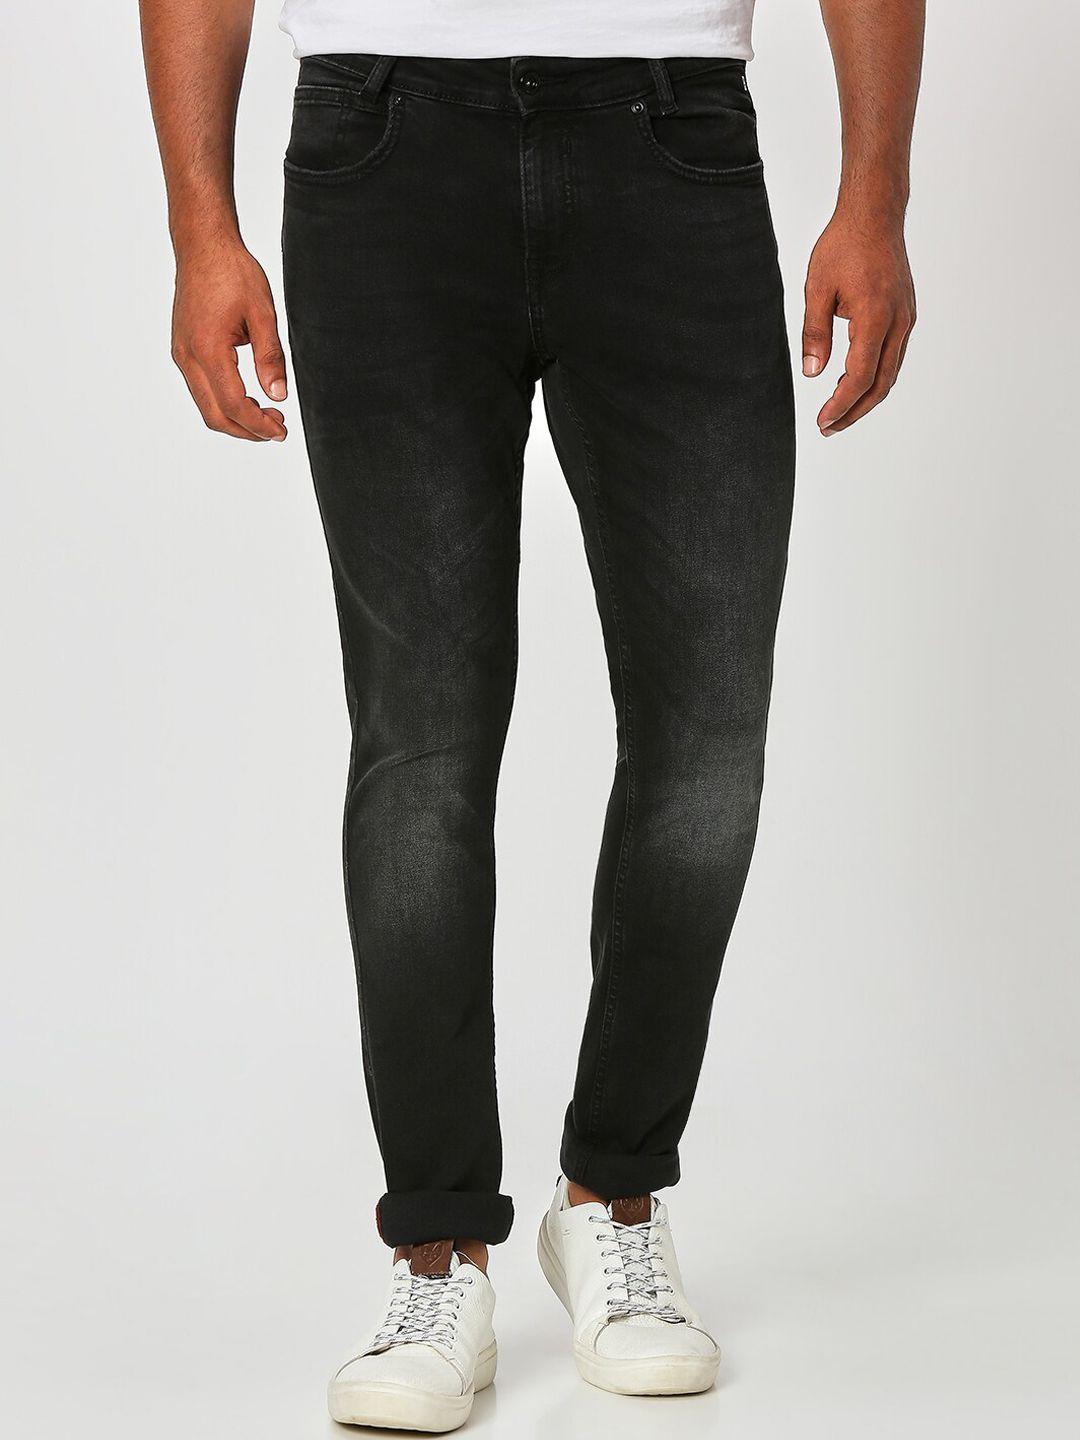 mufti-men-skinny-fit-light-fade-stretchable-jeans